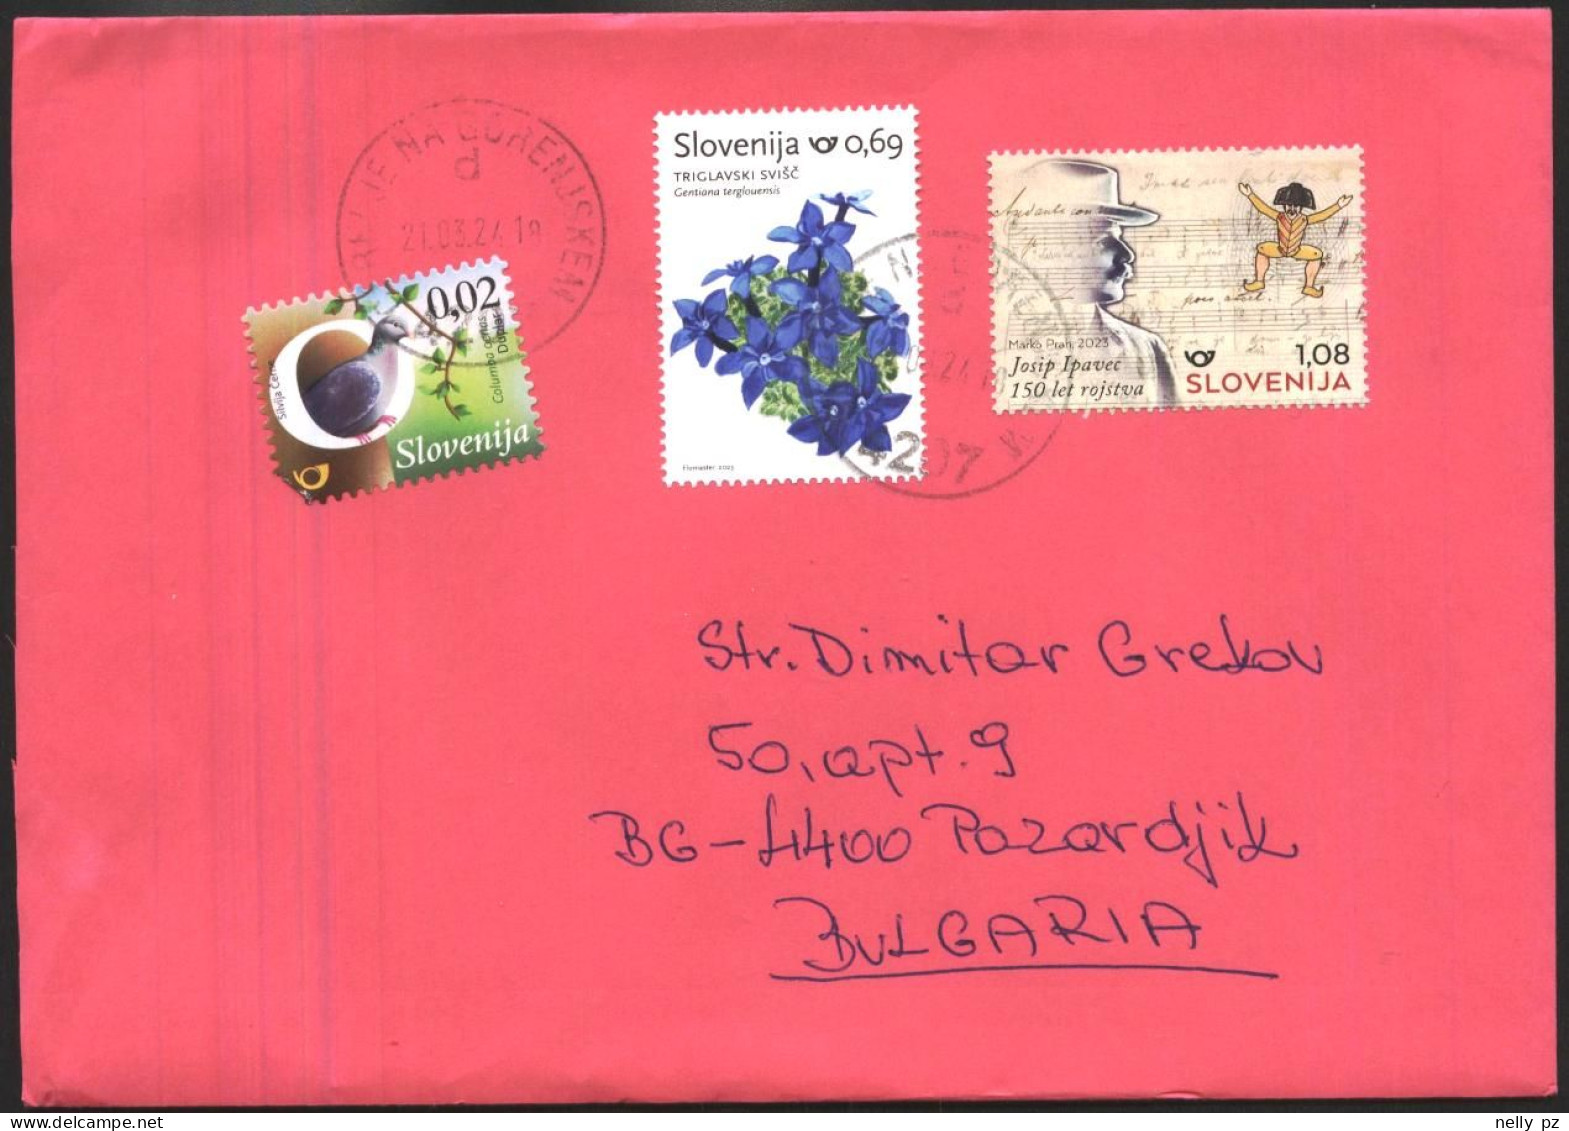 Mailed Cover With Stamps Josip Ipavec Composer 2023, Flowers 2021, Bird From Slovenia - Slovenia